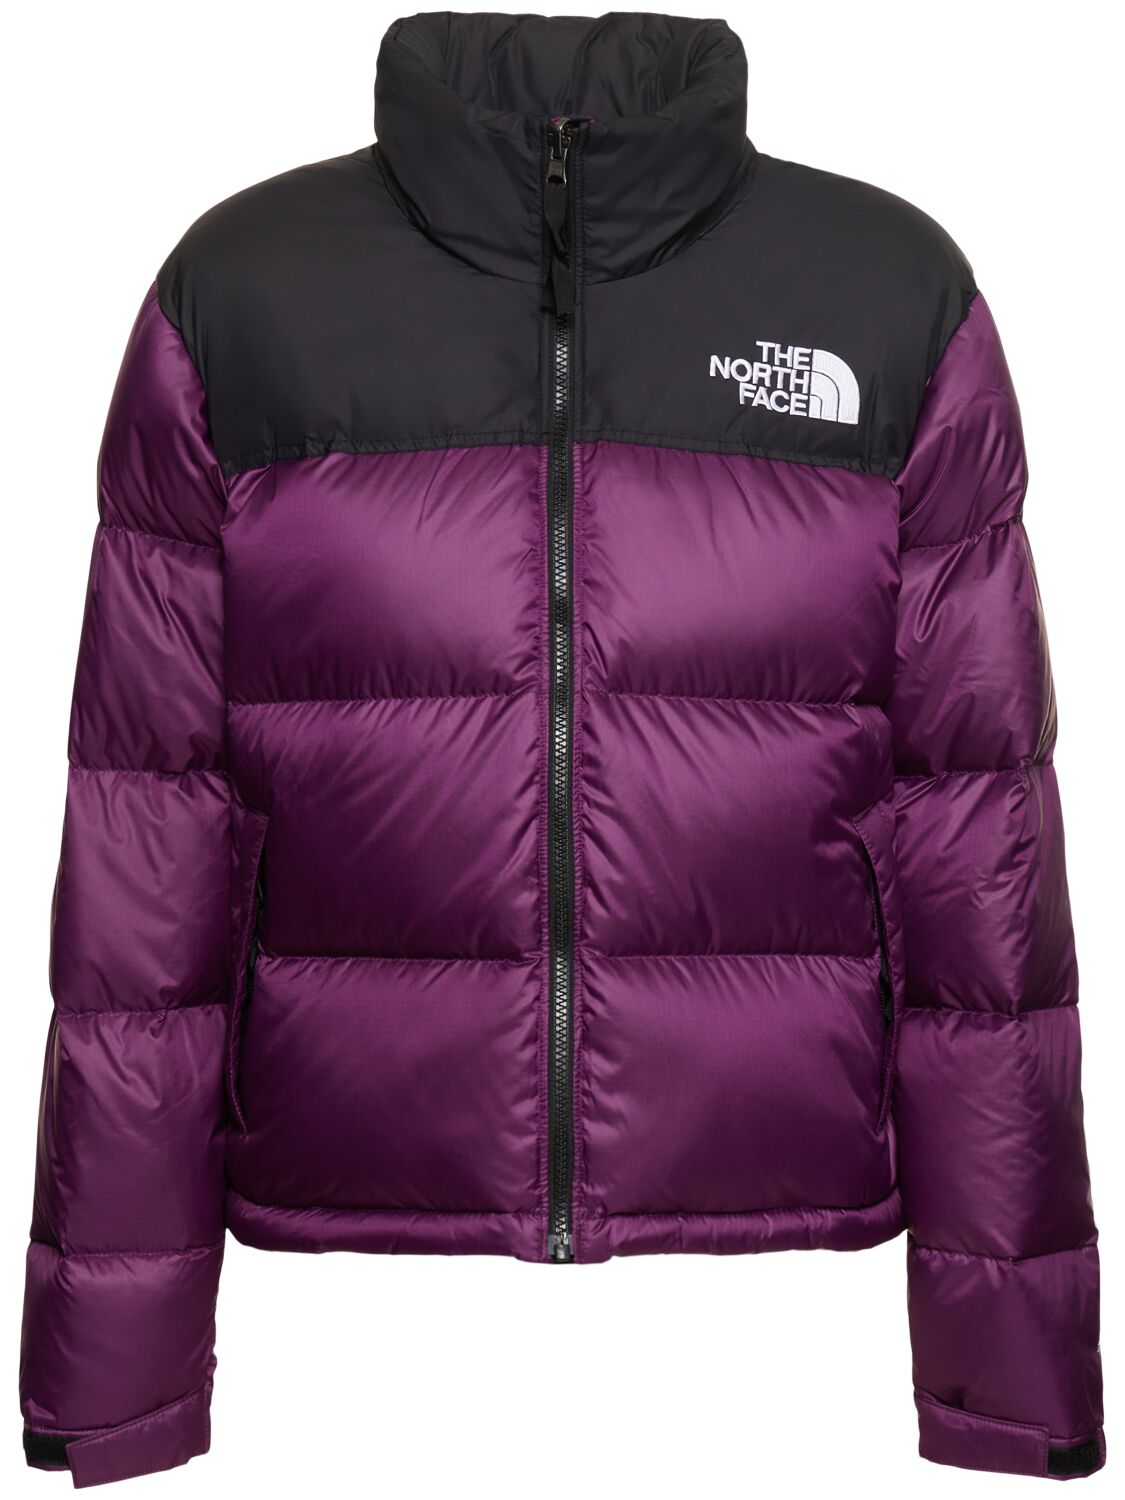 The North Face Nuptse cropped high pile fleece down jacket in black